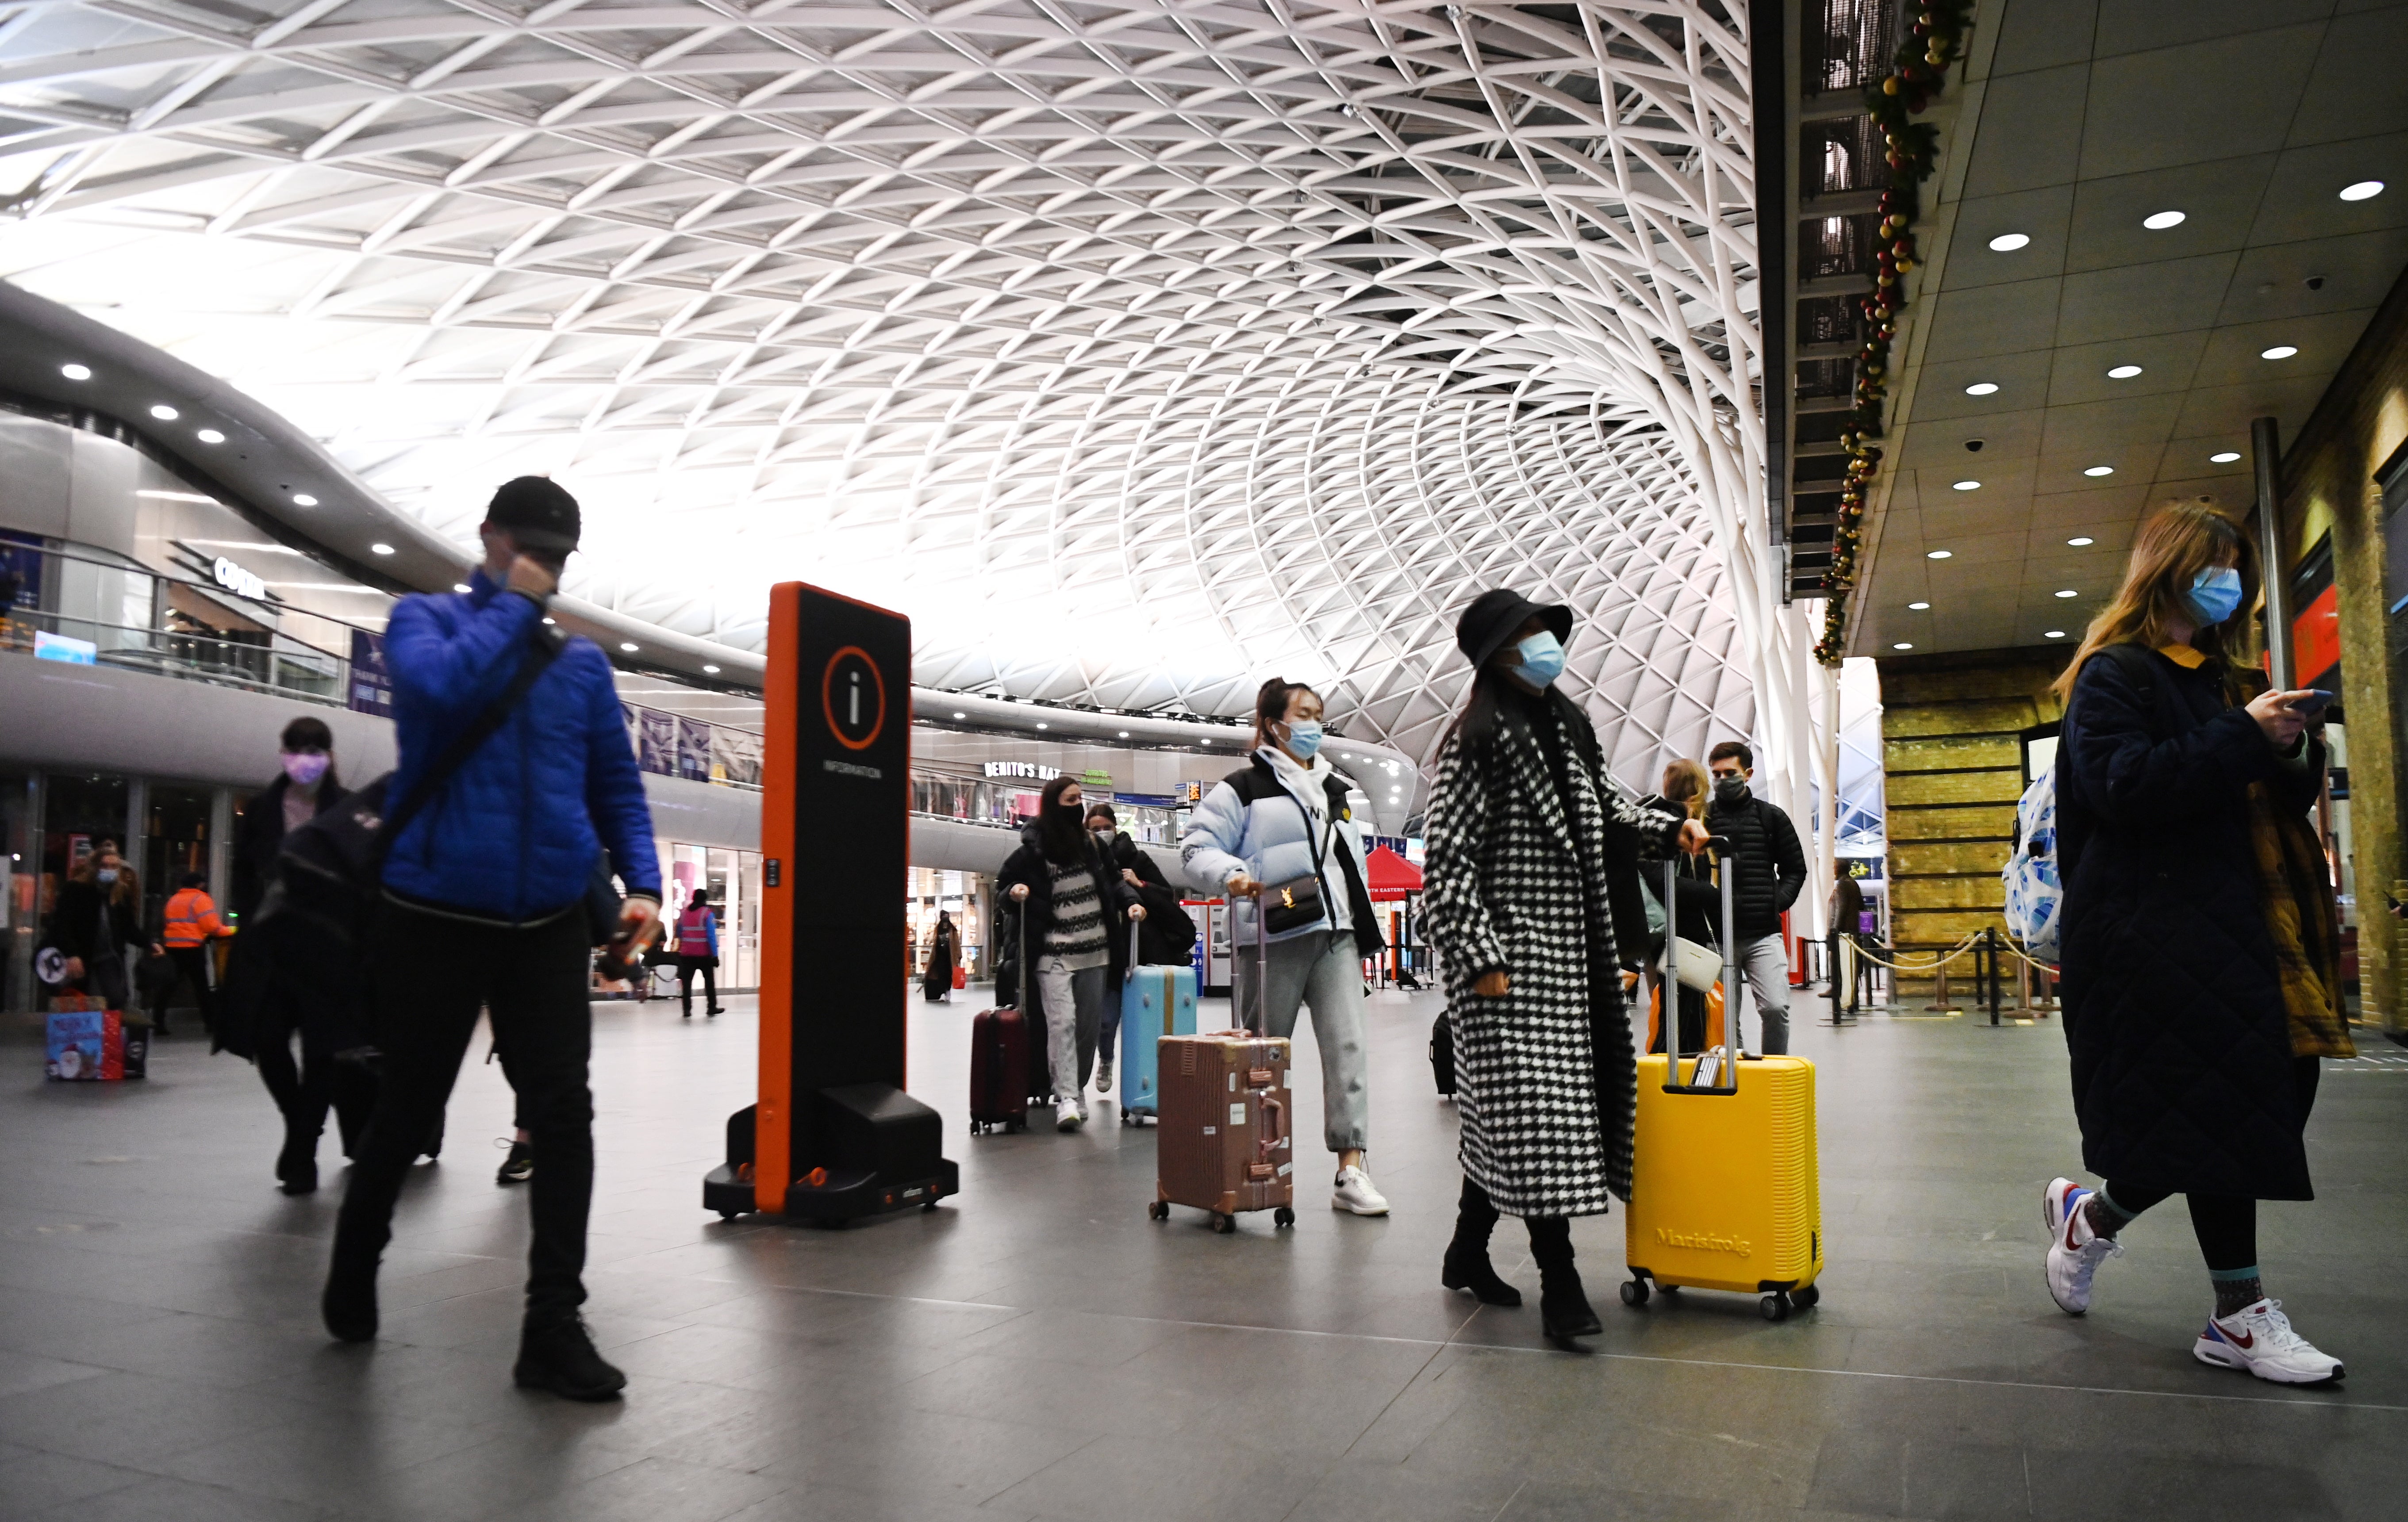 People at Kings Cross train station in London in December 2020 [stock photo]